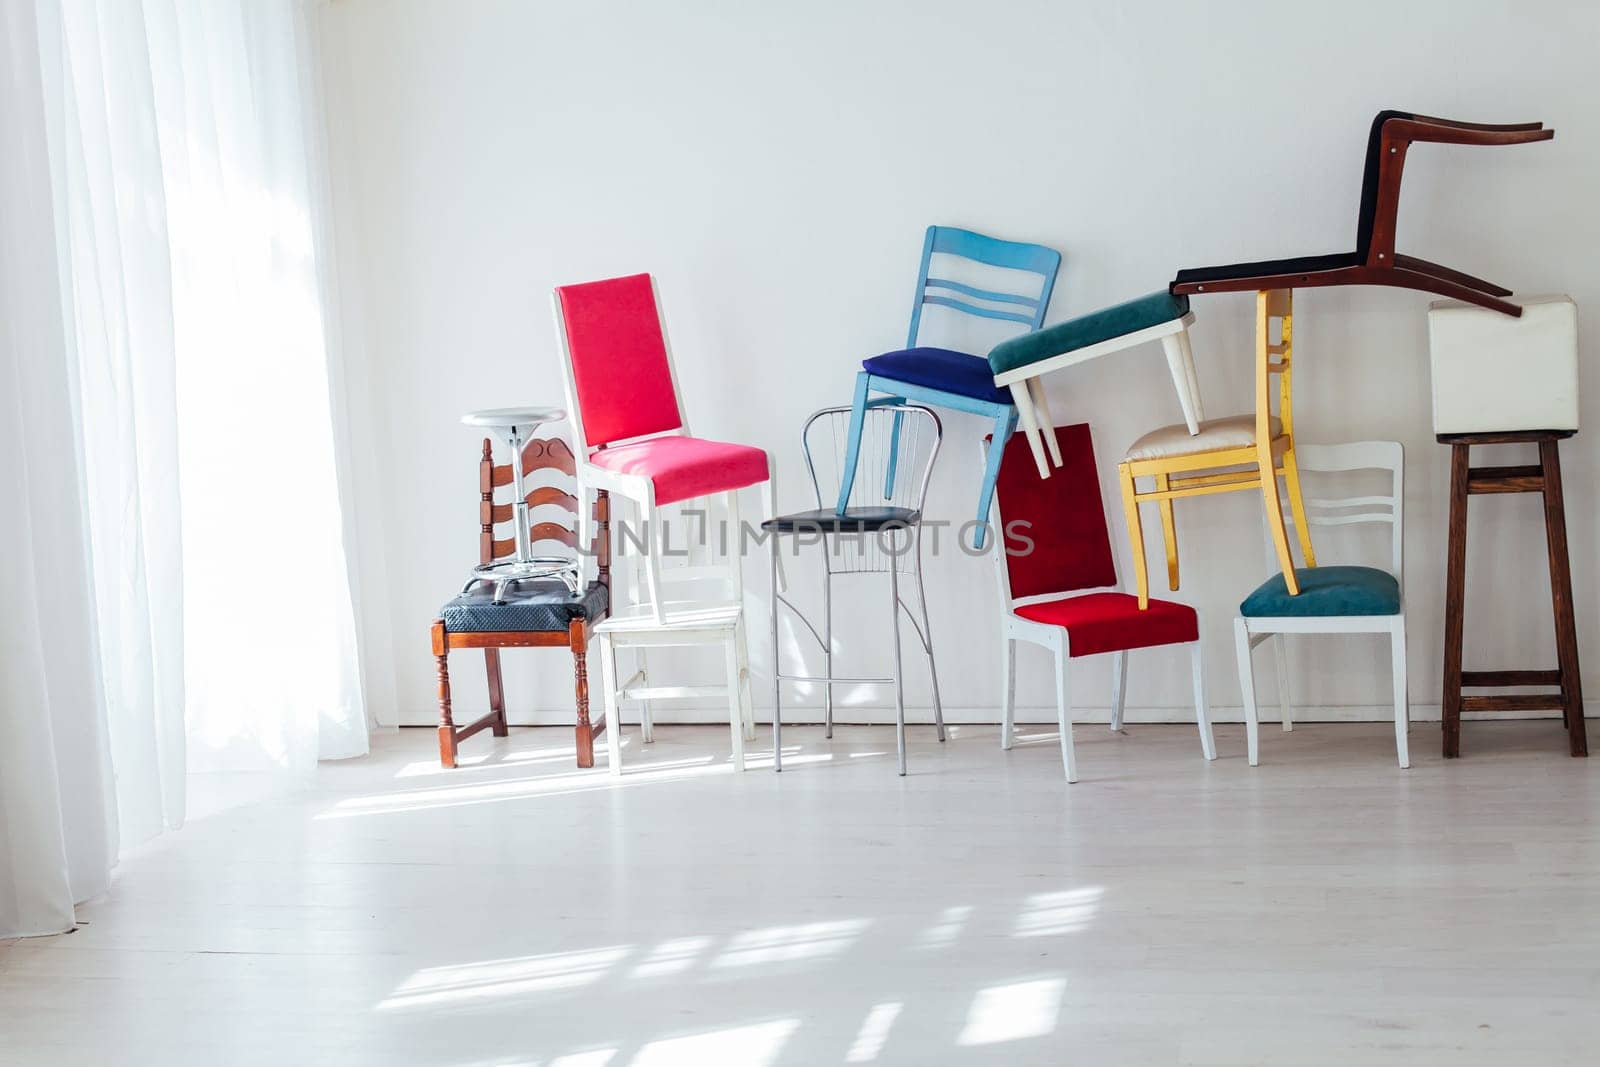 many multicolored chairs in the mess of the white room moving